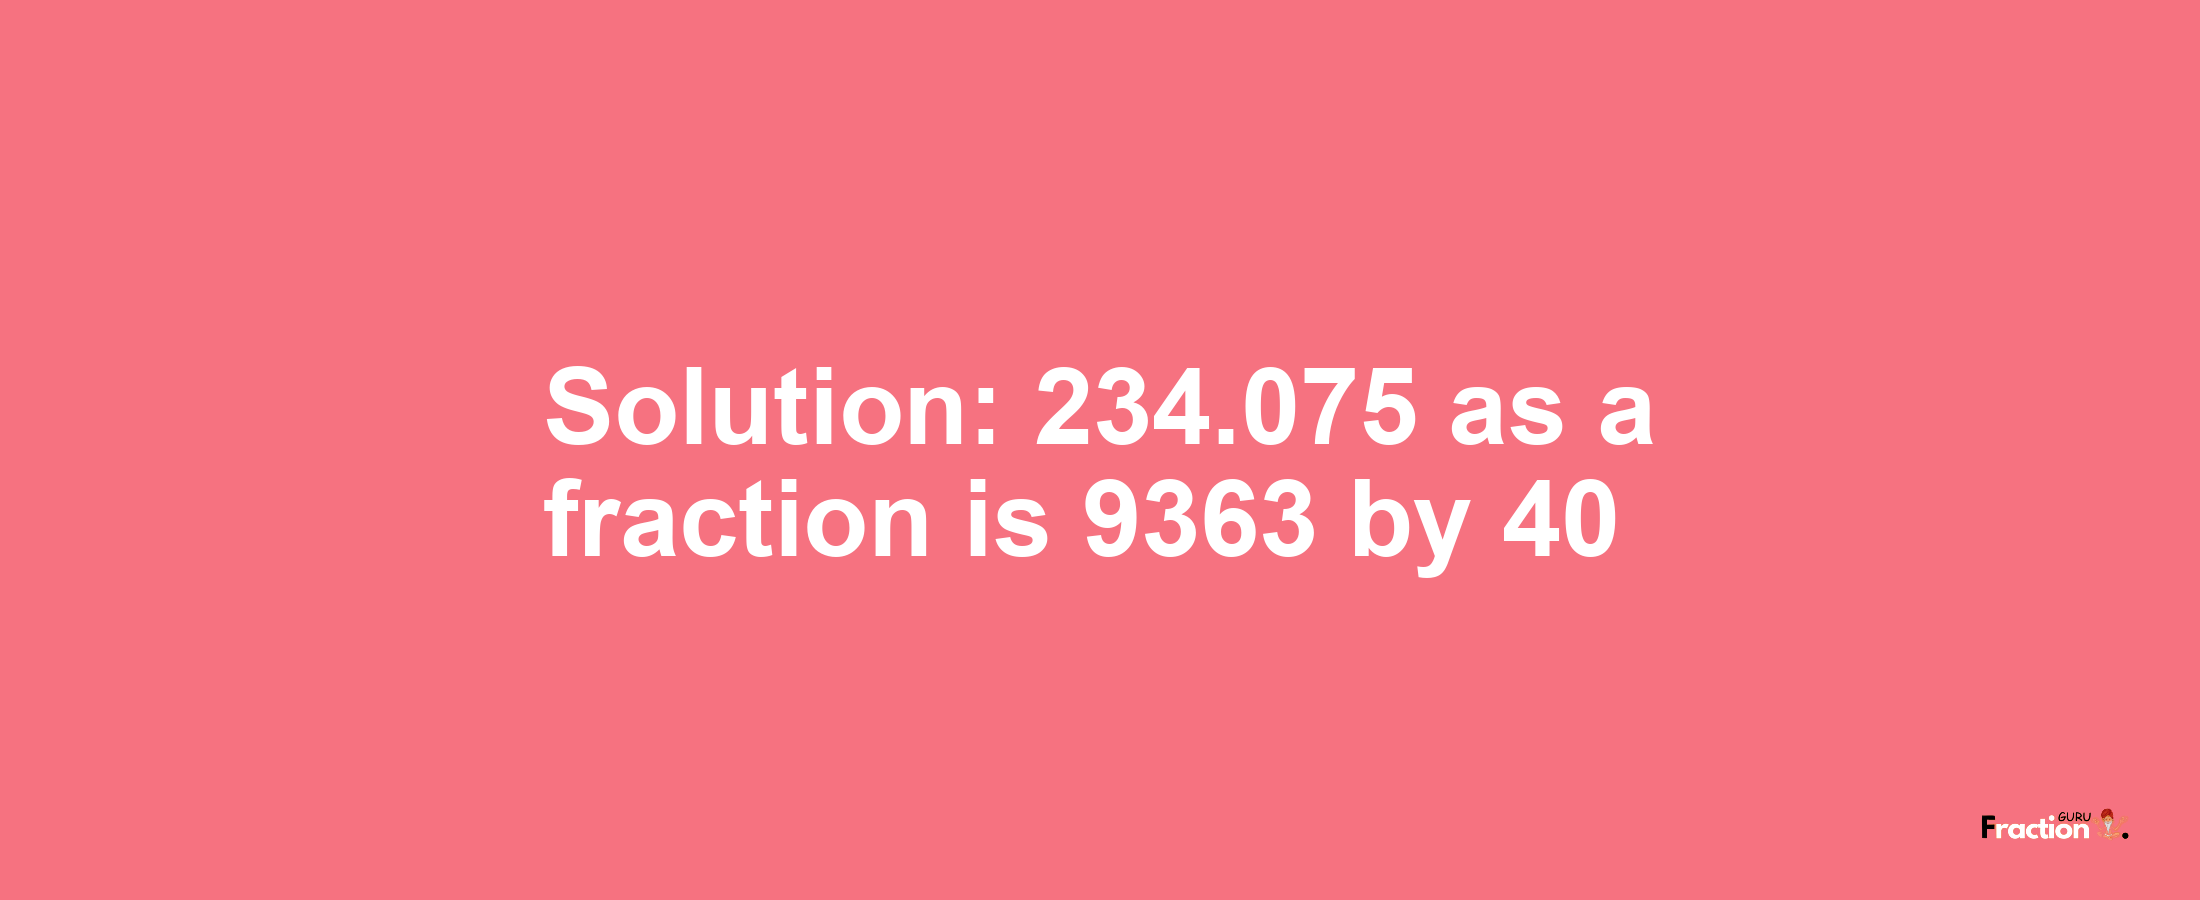 Solution:234.075 as a fraction is 9363/40